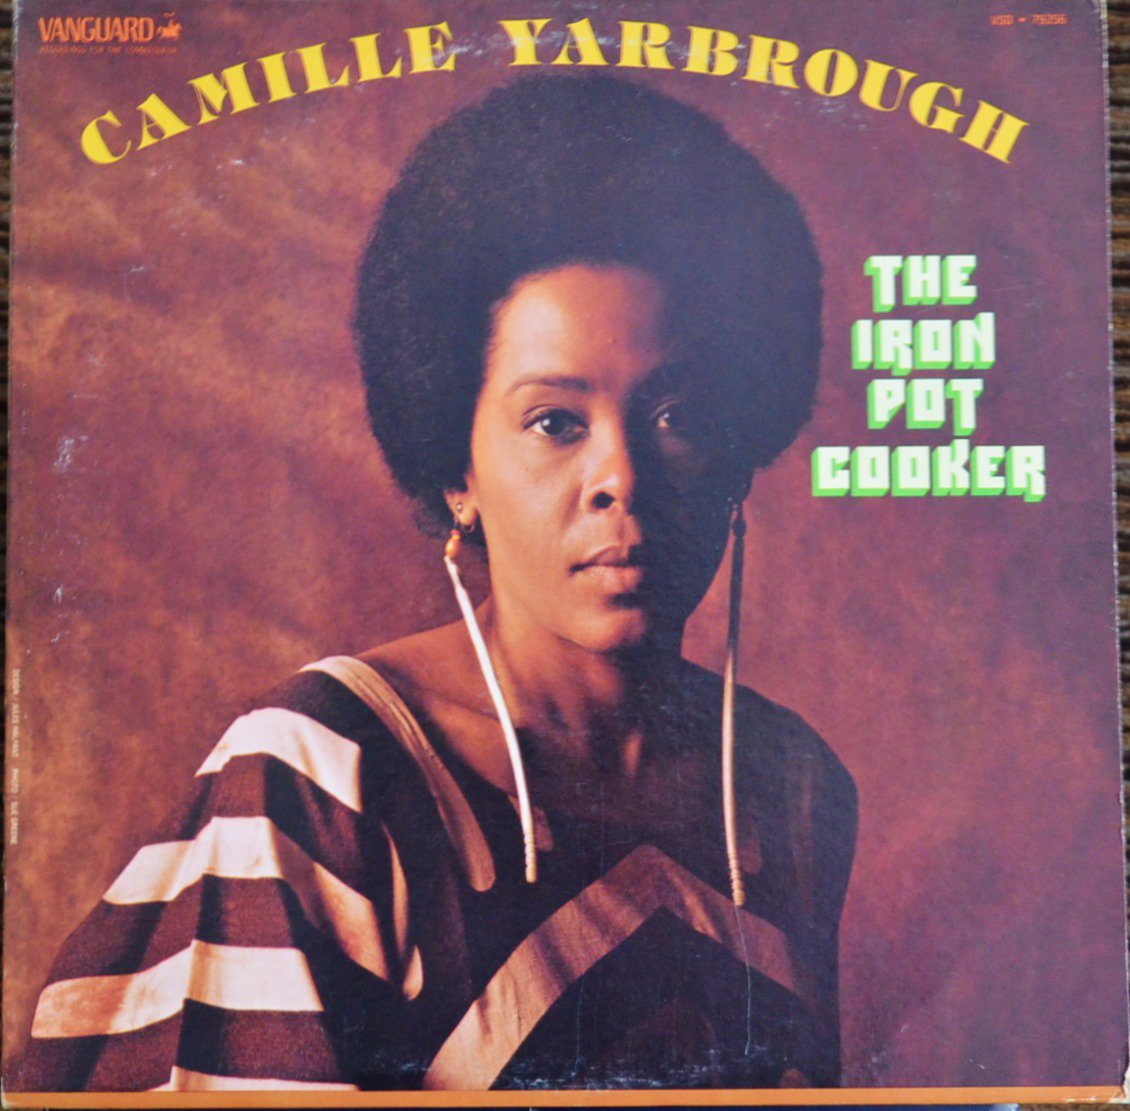 CAMILLE YARBROUGH / THE IRON POT COOKER (LP)